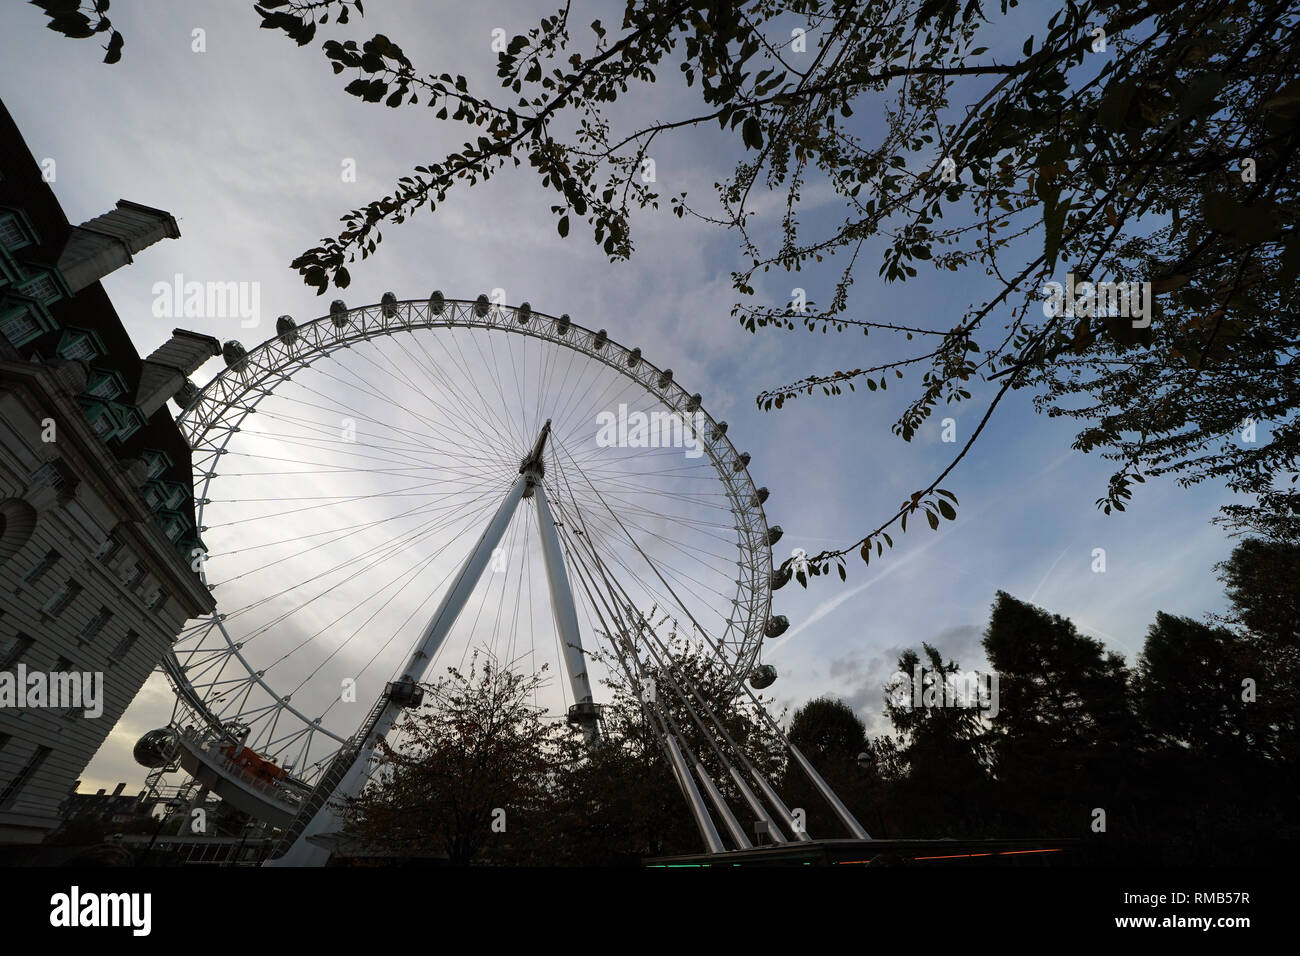 A view of the Coco Cola London Eye in London, United Kingdom.  It is Europe's tallest cantilevered observation wheel. Stock Photo